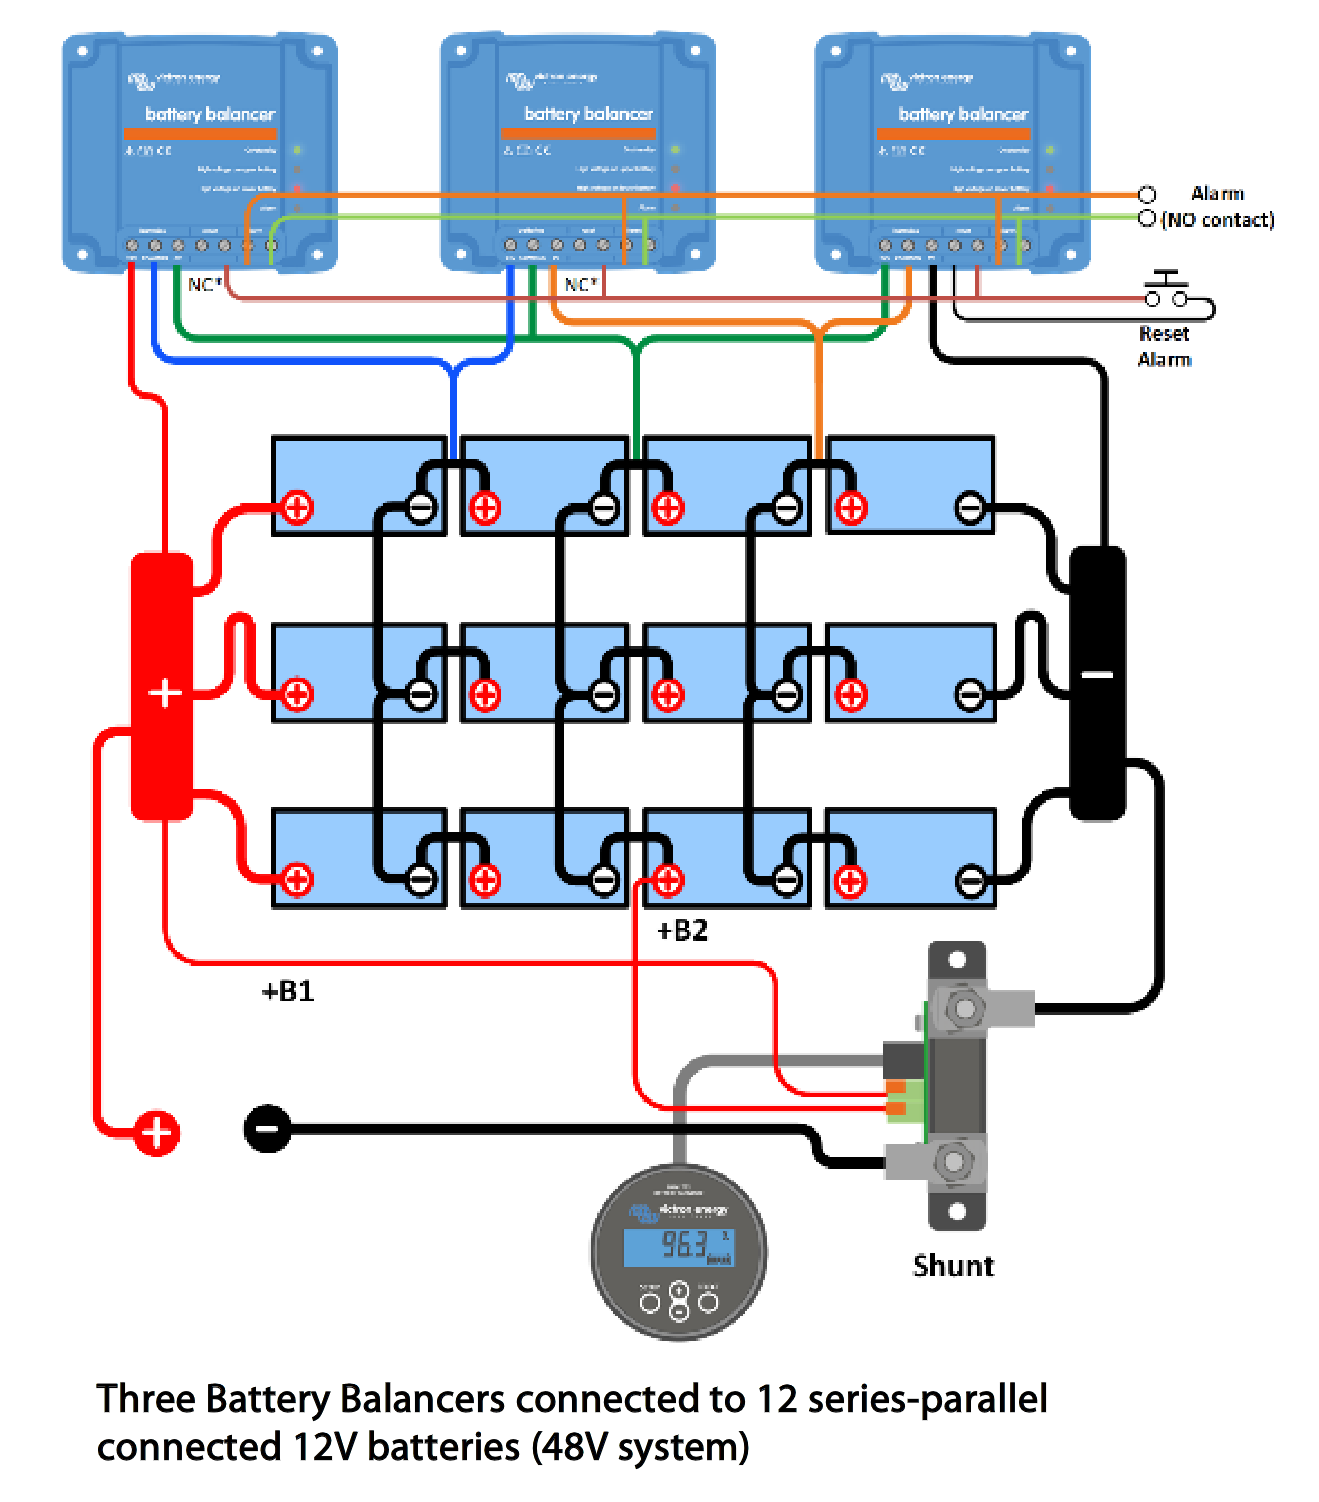 An interesting drawing from Victron regarding Battery Balancing on a budget  using 12V Batteries in Series/Parallel and cable sizing.